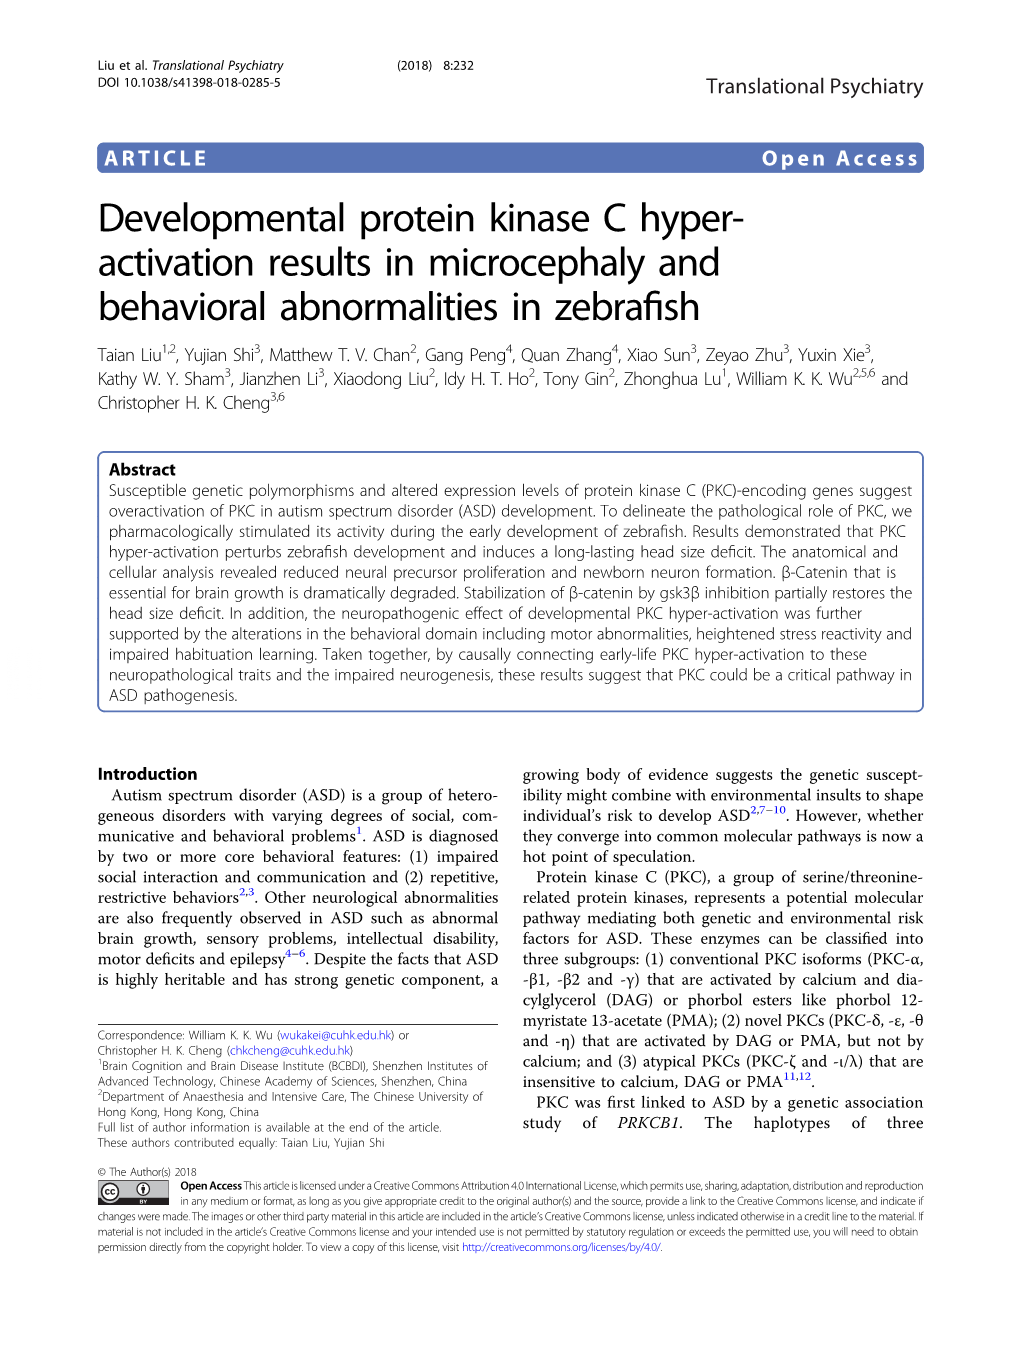 Developmental Protein Kinase C Hyper-Activation Results in Microcephaly